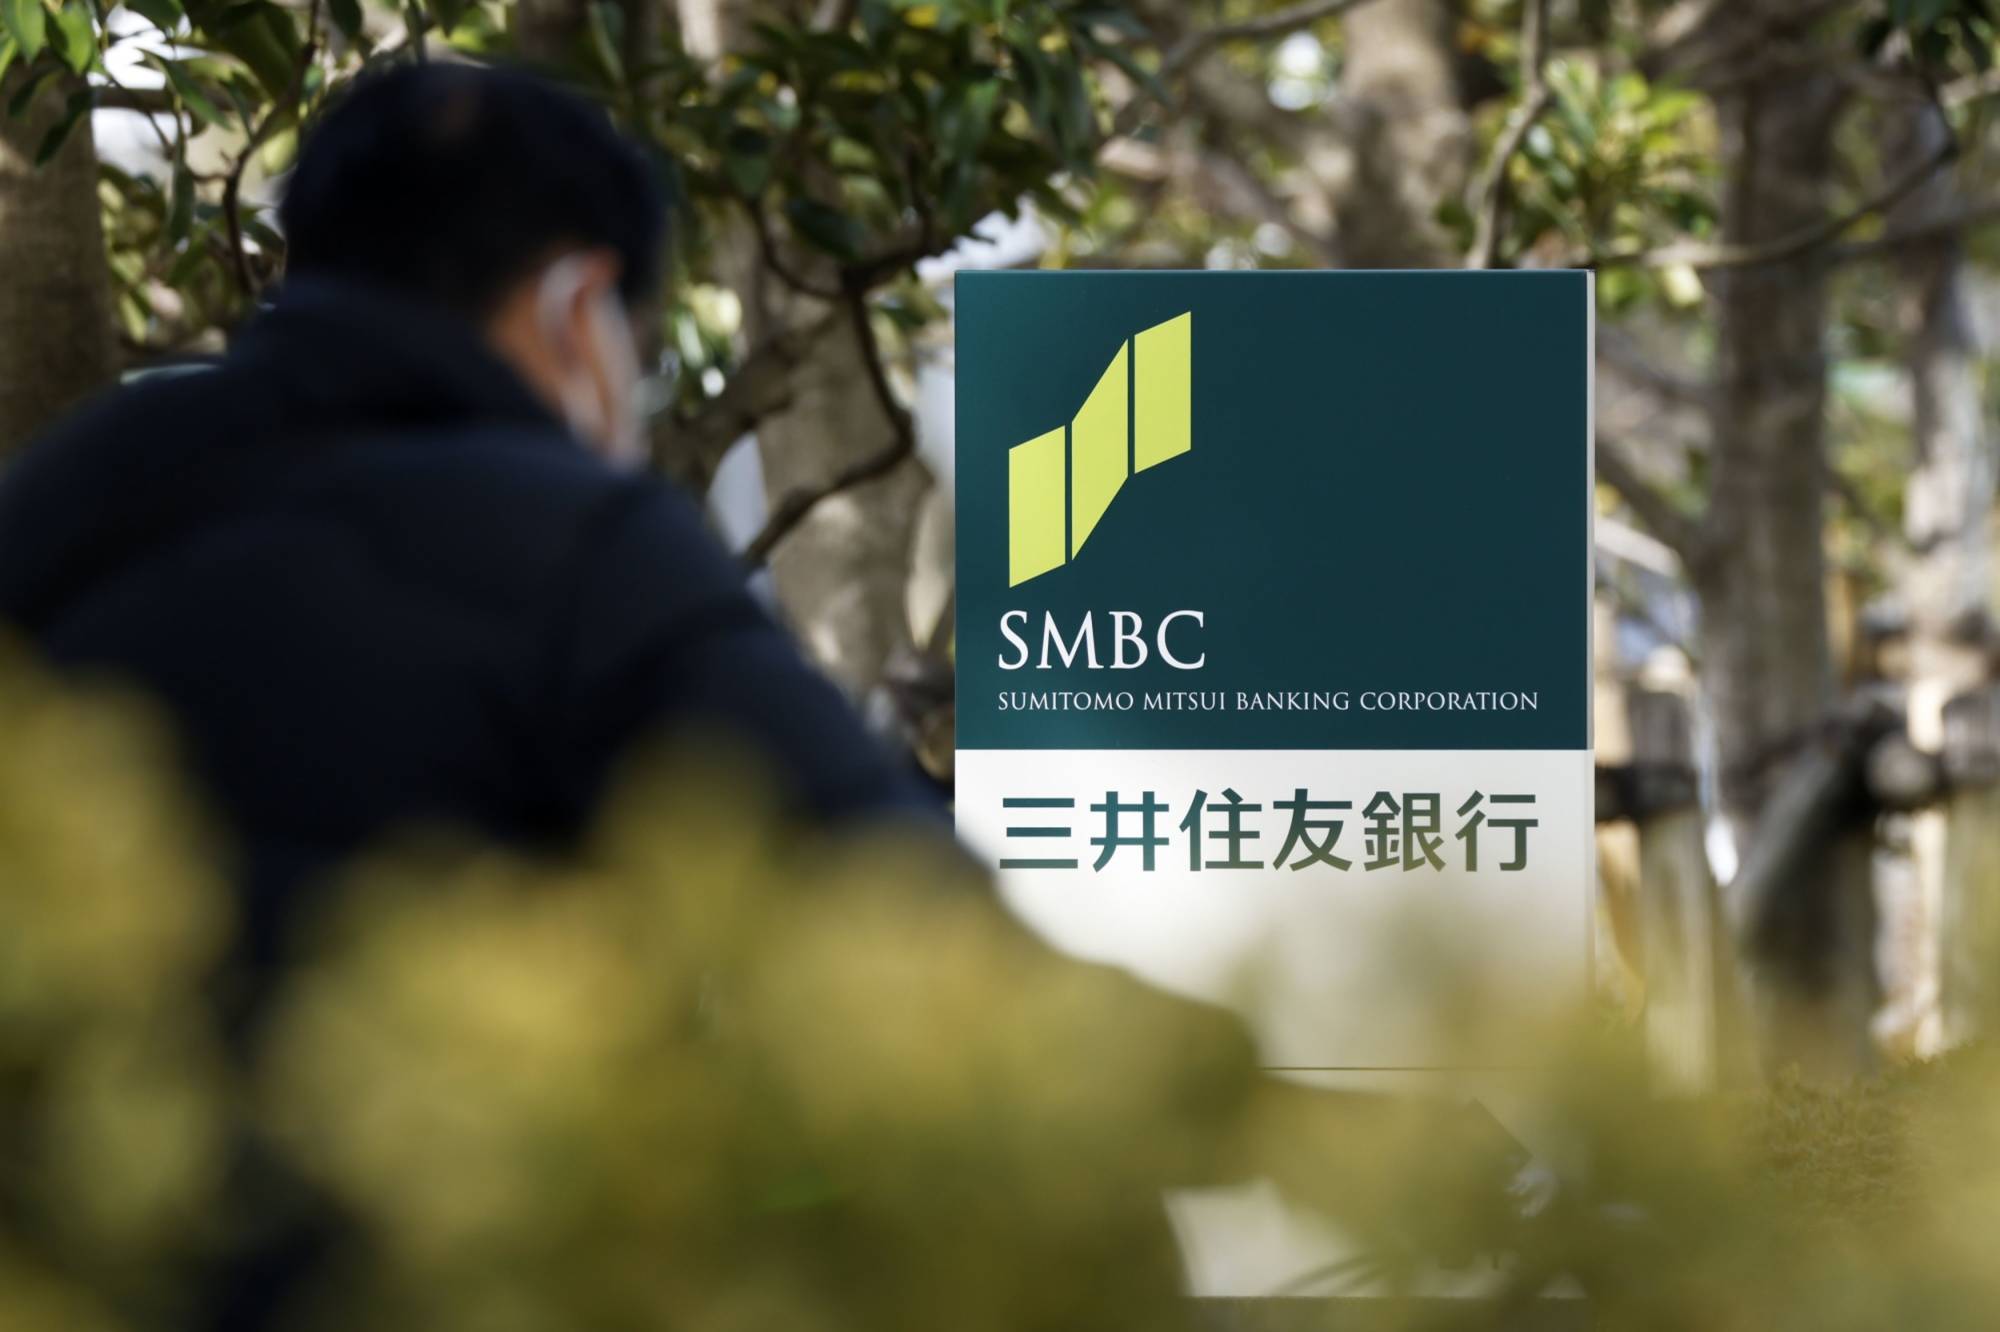 Sumitomo Mitsui Banking Corp. has said it will provide no project or corporate finance exposure to coal mining or coal-fired power plants by 2040. | BLOOMBERG